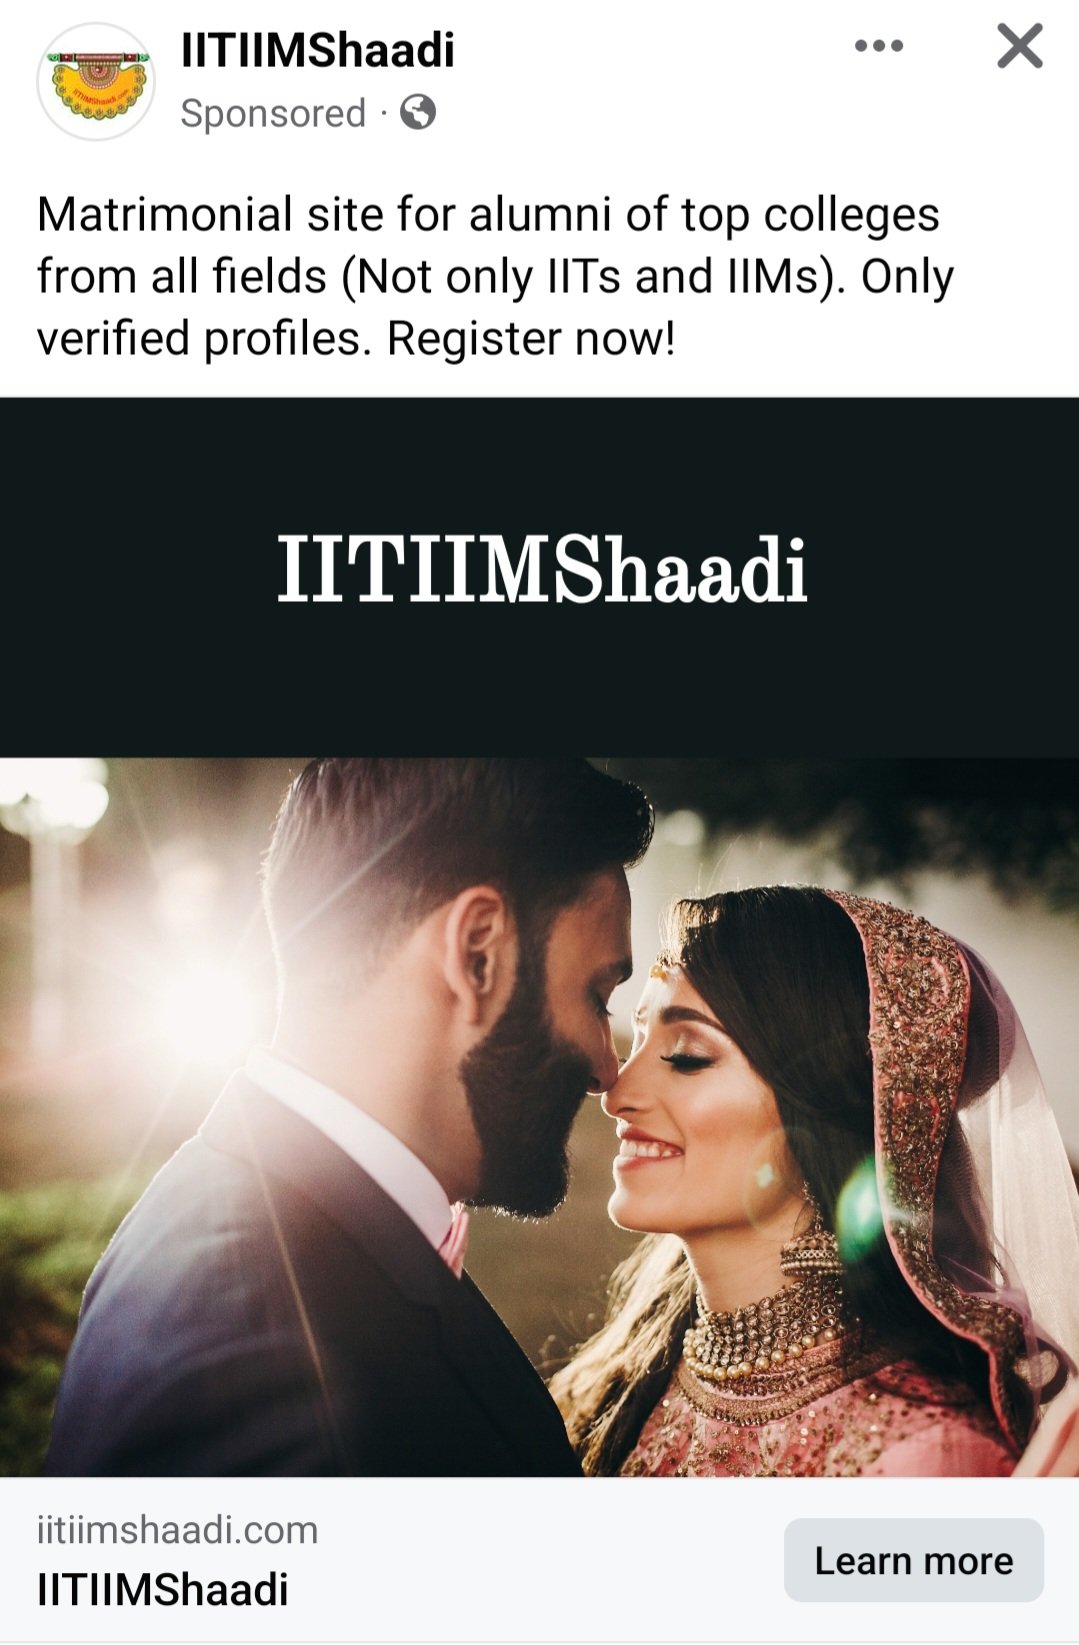 Find a compatible match with usIITIIMShaadi - Only Highly